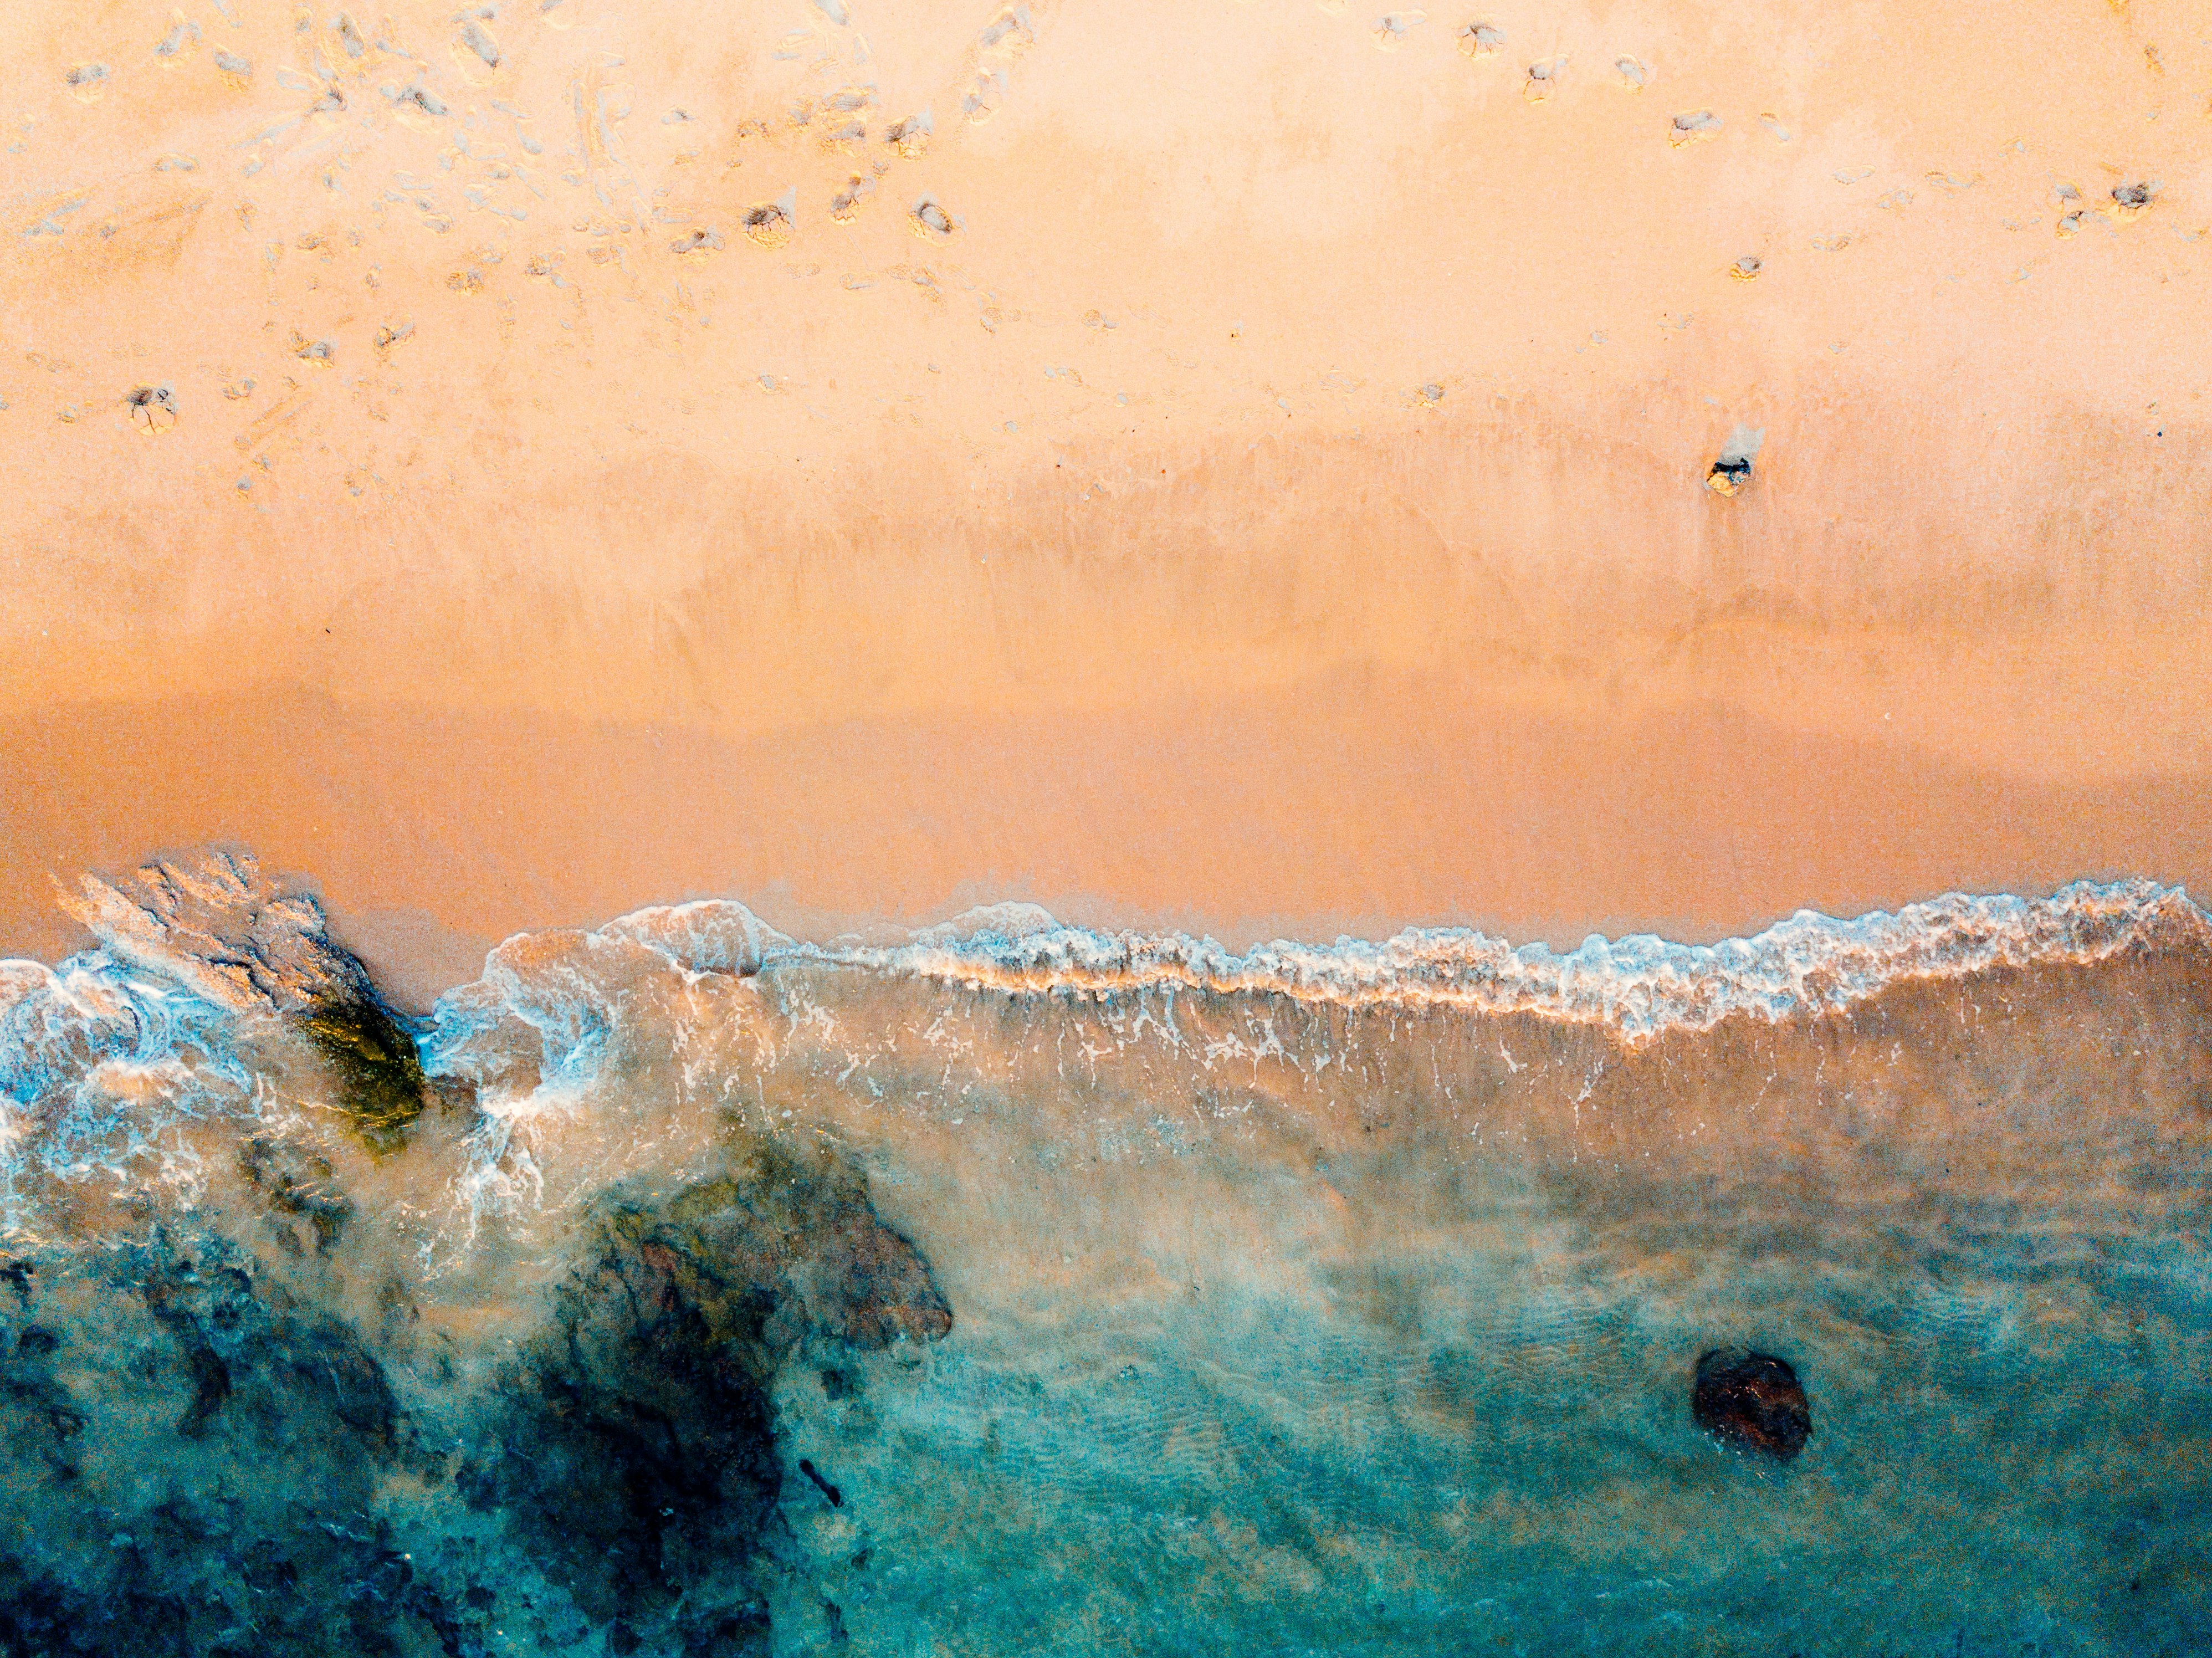 drone shot of beach and body of water on brown sand